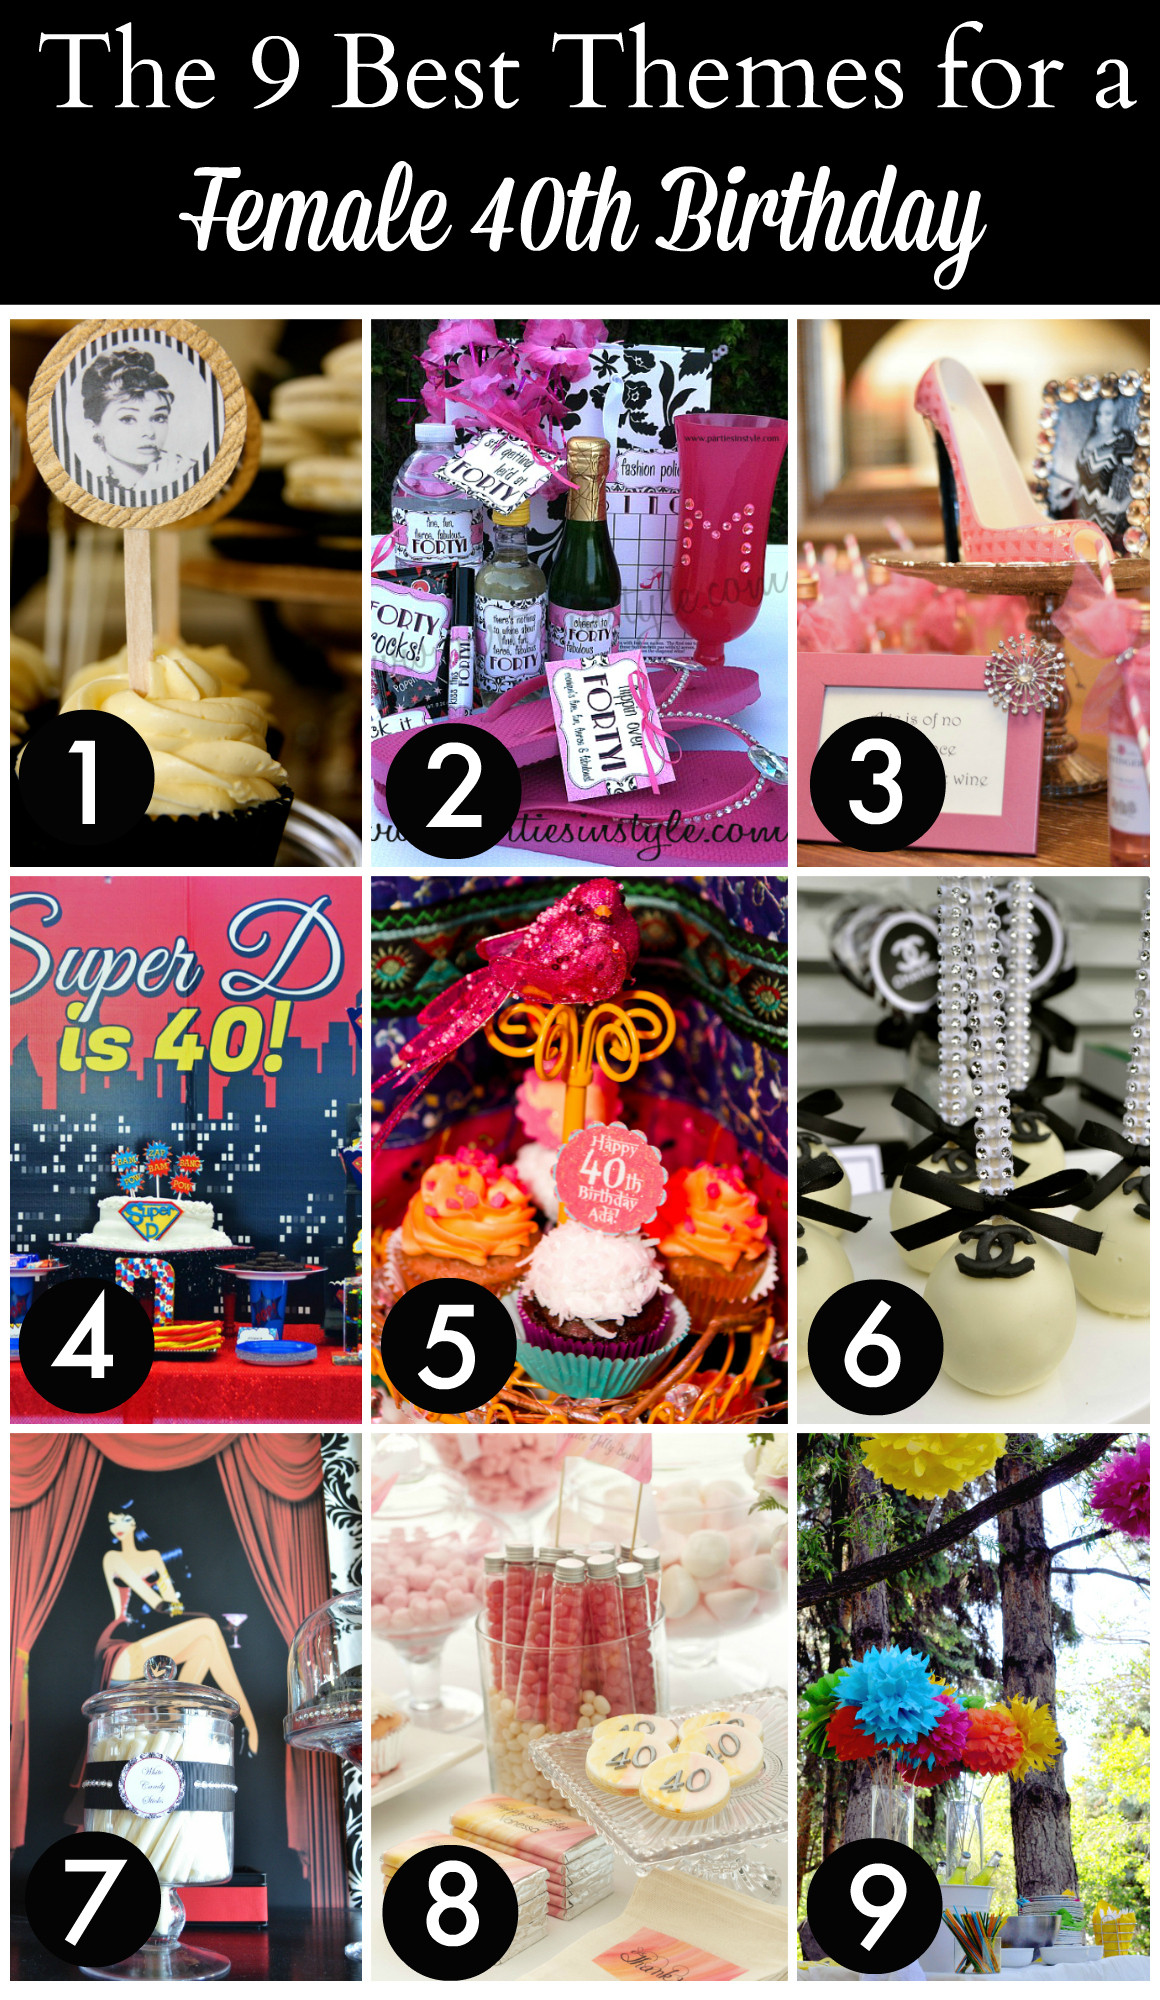 Birthday Gift Ideas For 40 Year Old Woman
 Take a look at the 12 BEST 40th Birthday Themes for Women